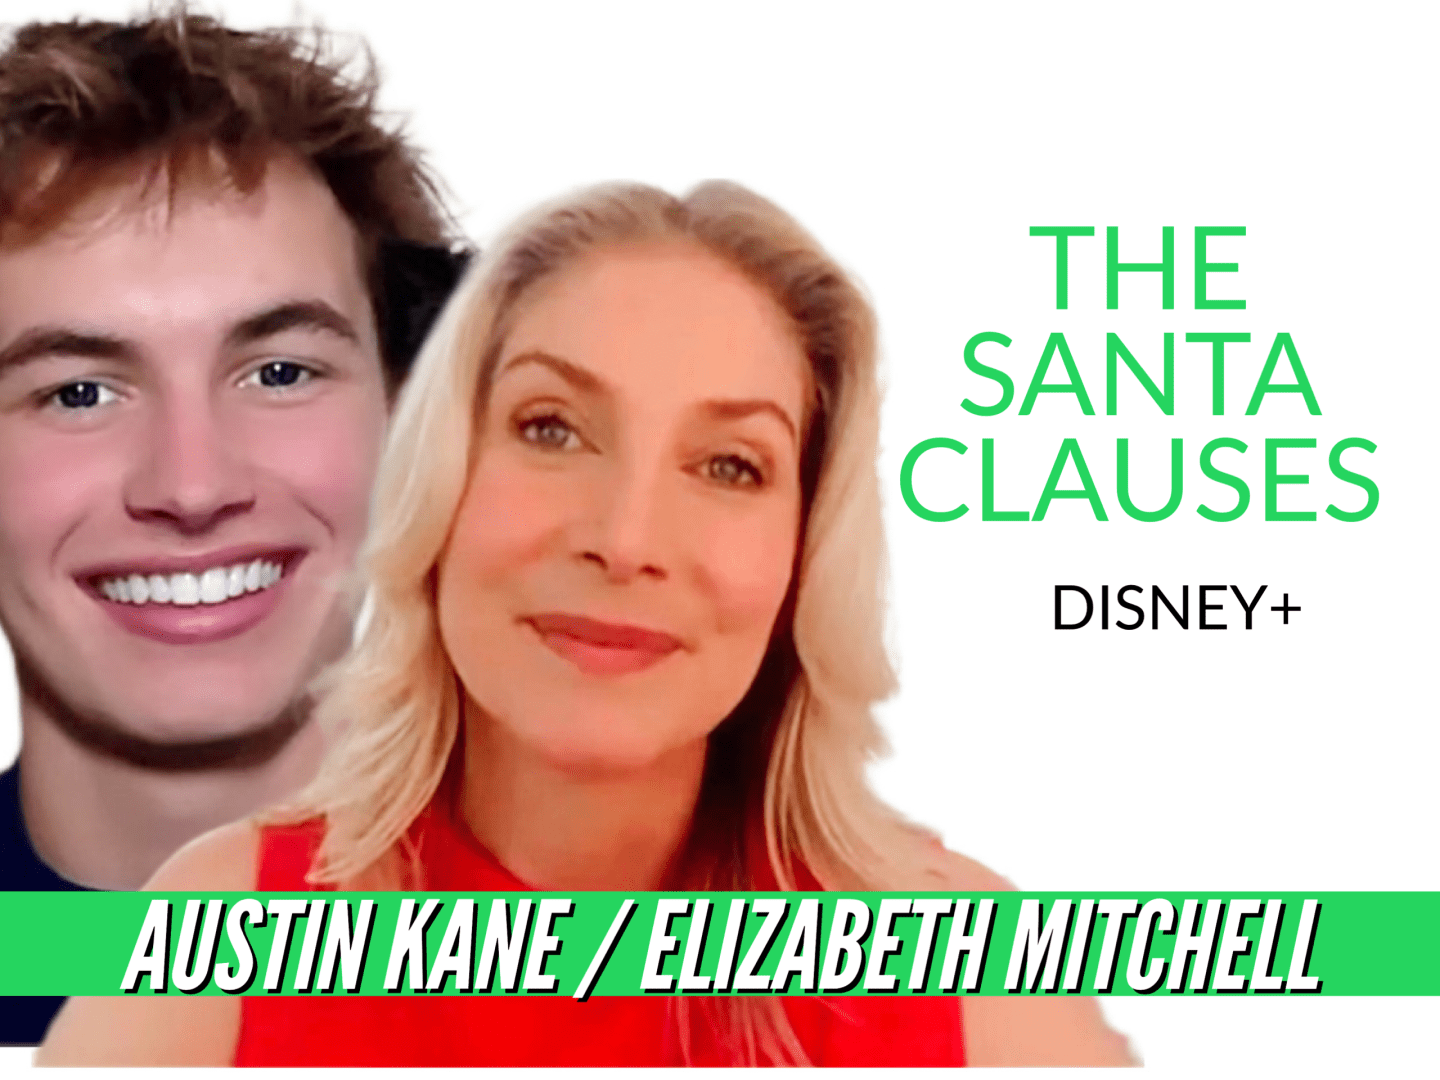 Elizabeth Mitchell and Austin Kane star in 'The Santa Clauses'